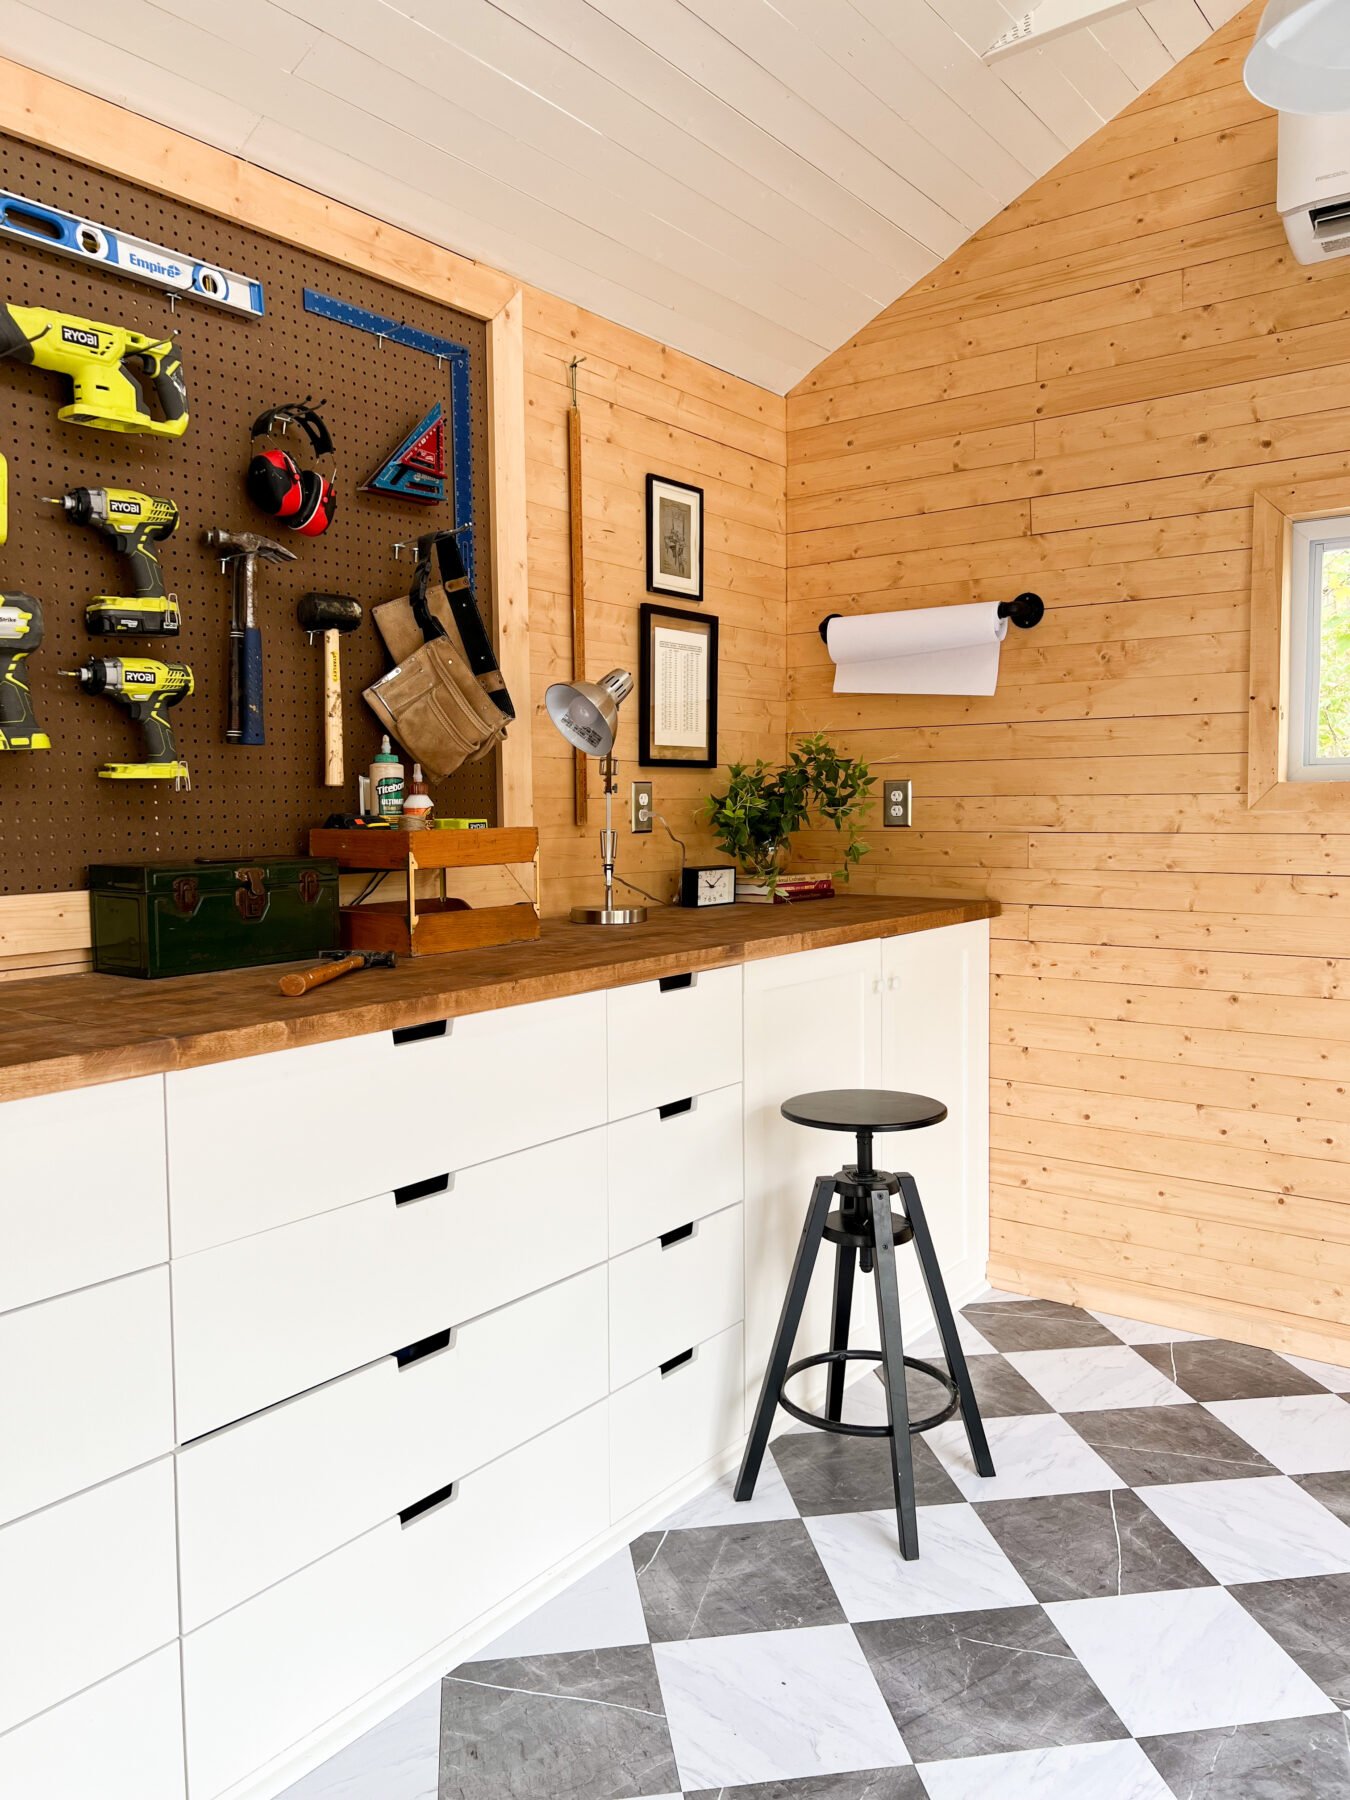 A look at the DIY workshop workbench and tool storage.